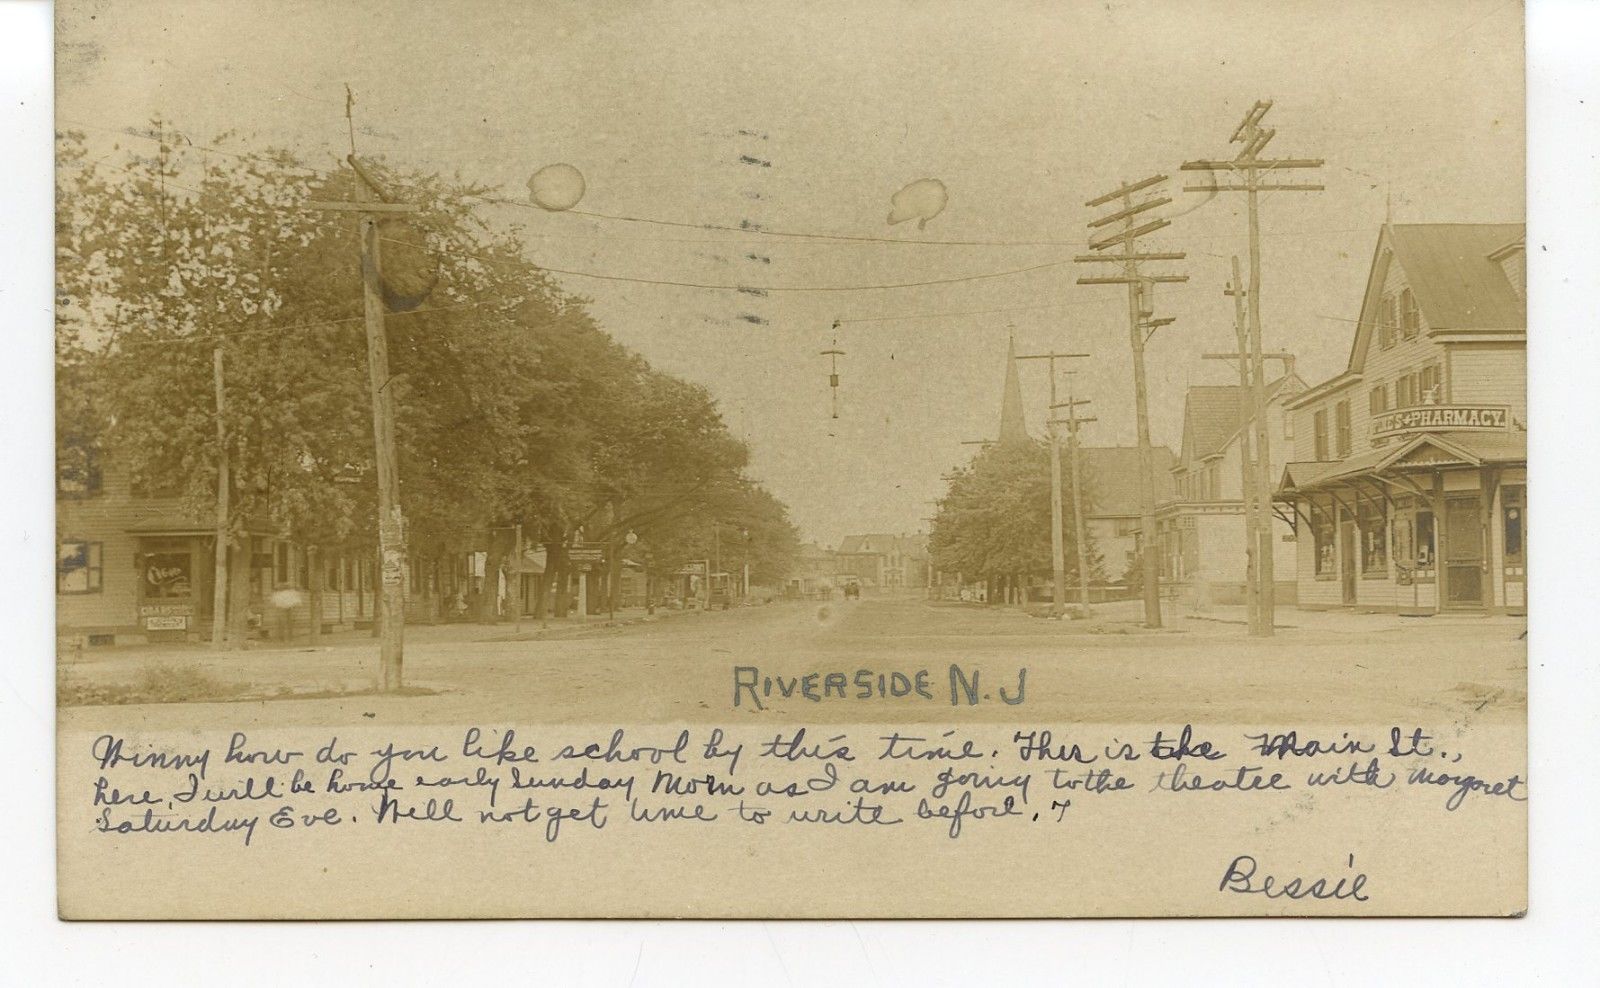 Riverside - Street view featuring a phamacy - 1906